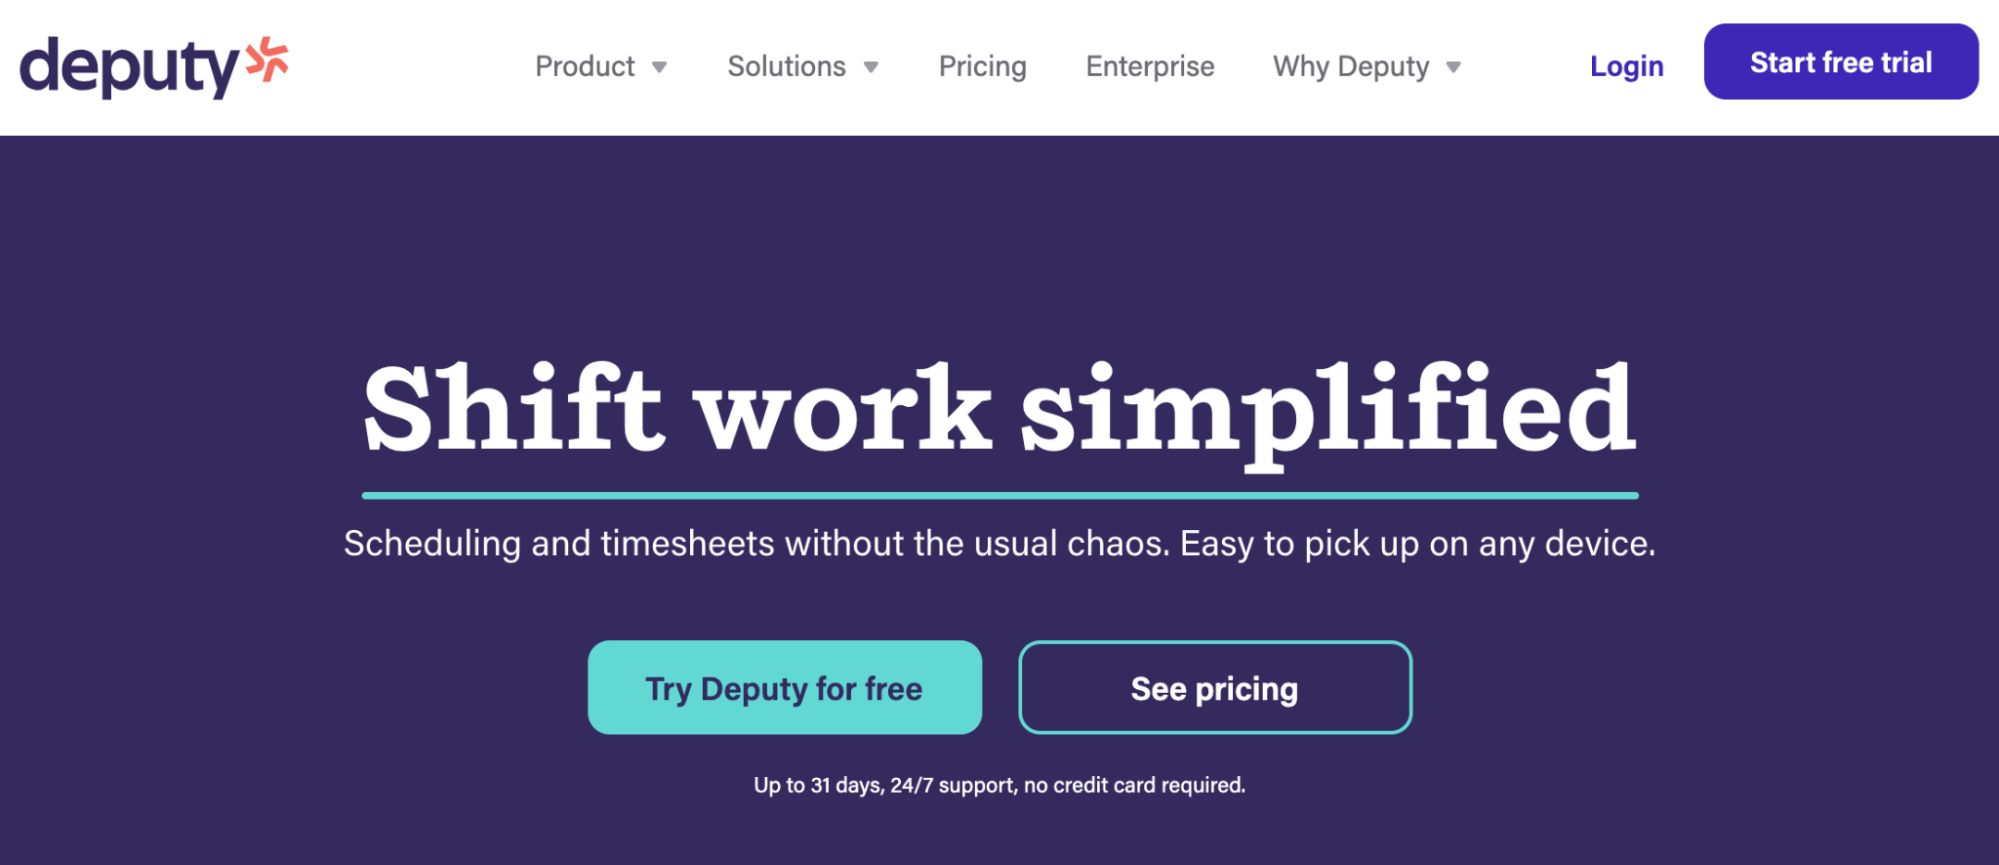 Deputy scheduling and timesheet solution homepage.